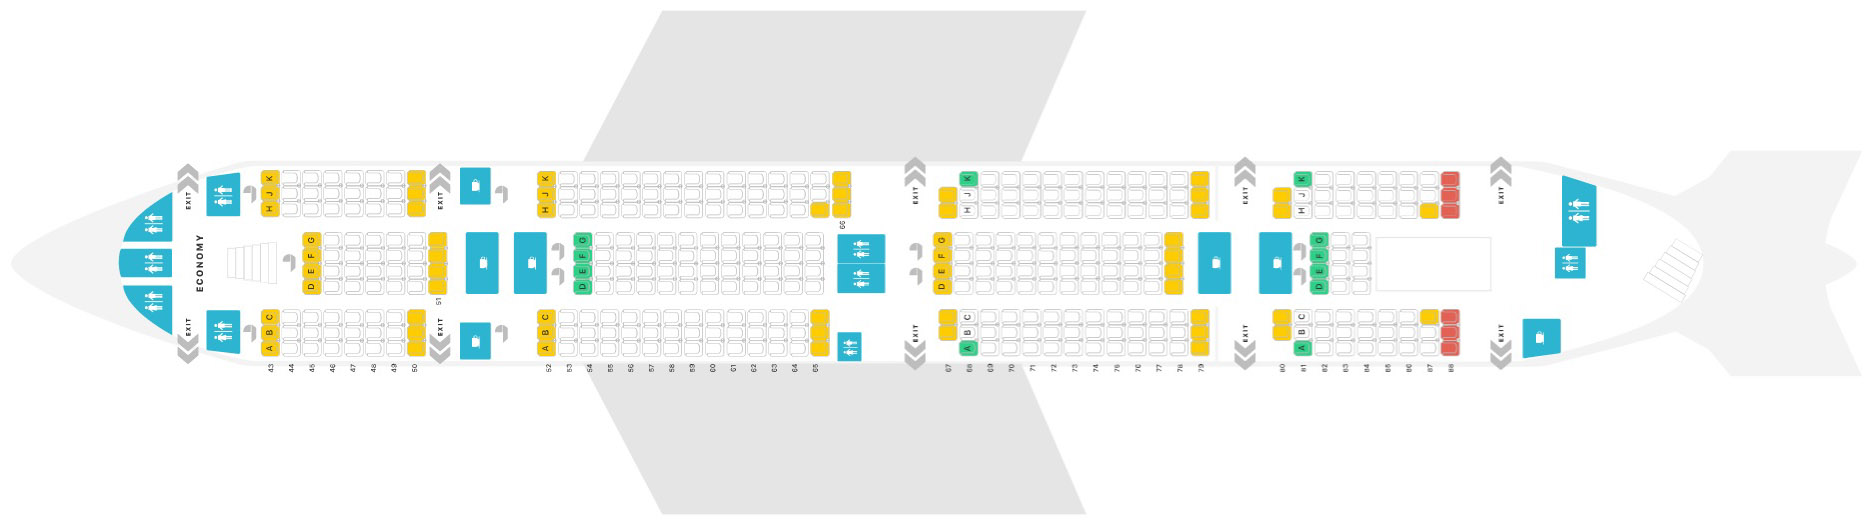 Emirates Airbus A380-800 Three Class Layout 1